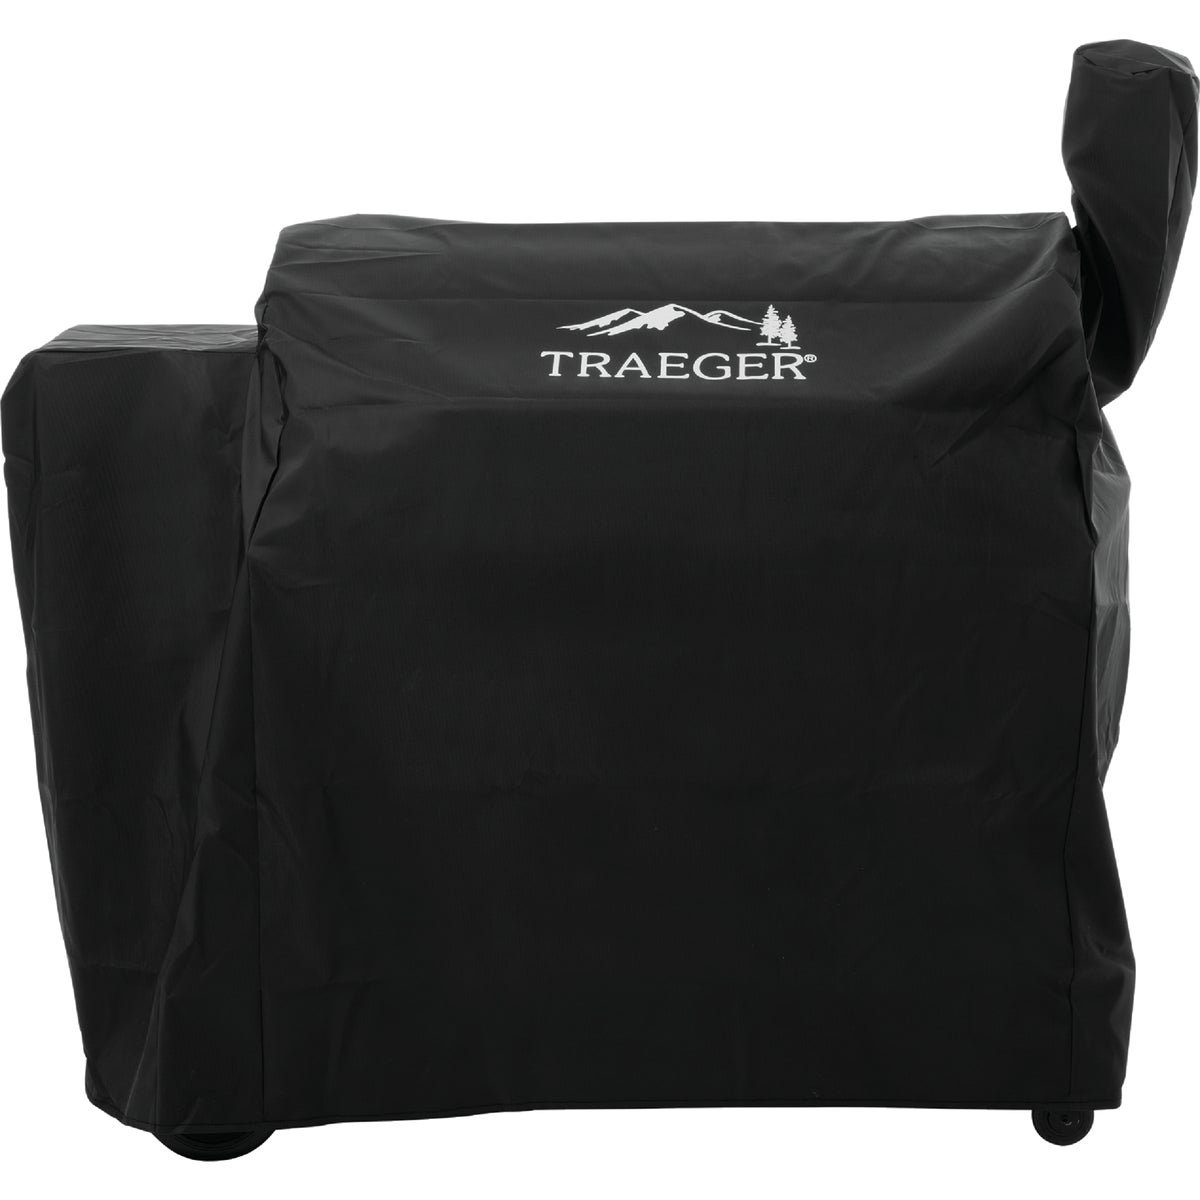 Traeger 34 Series 42 In. Black Polyester Full-Length Grill Cover